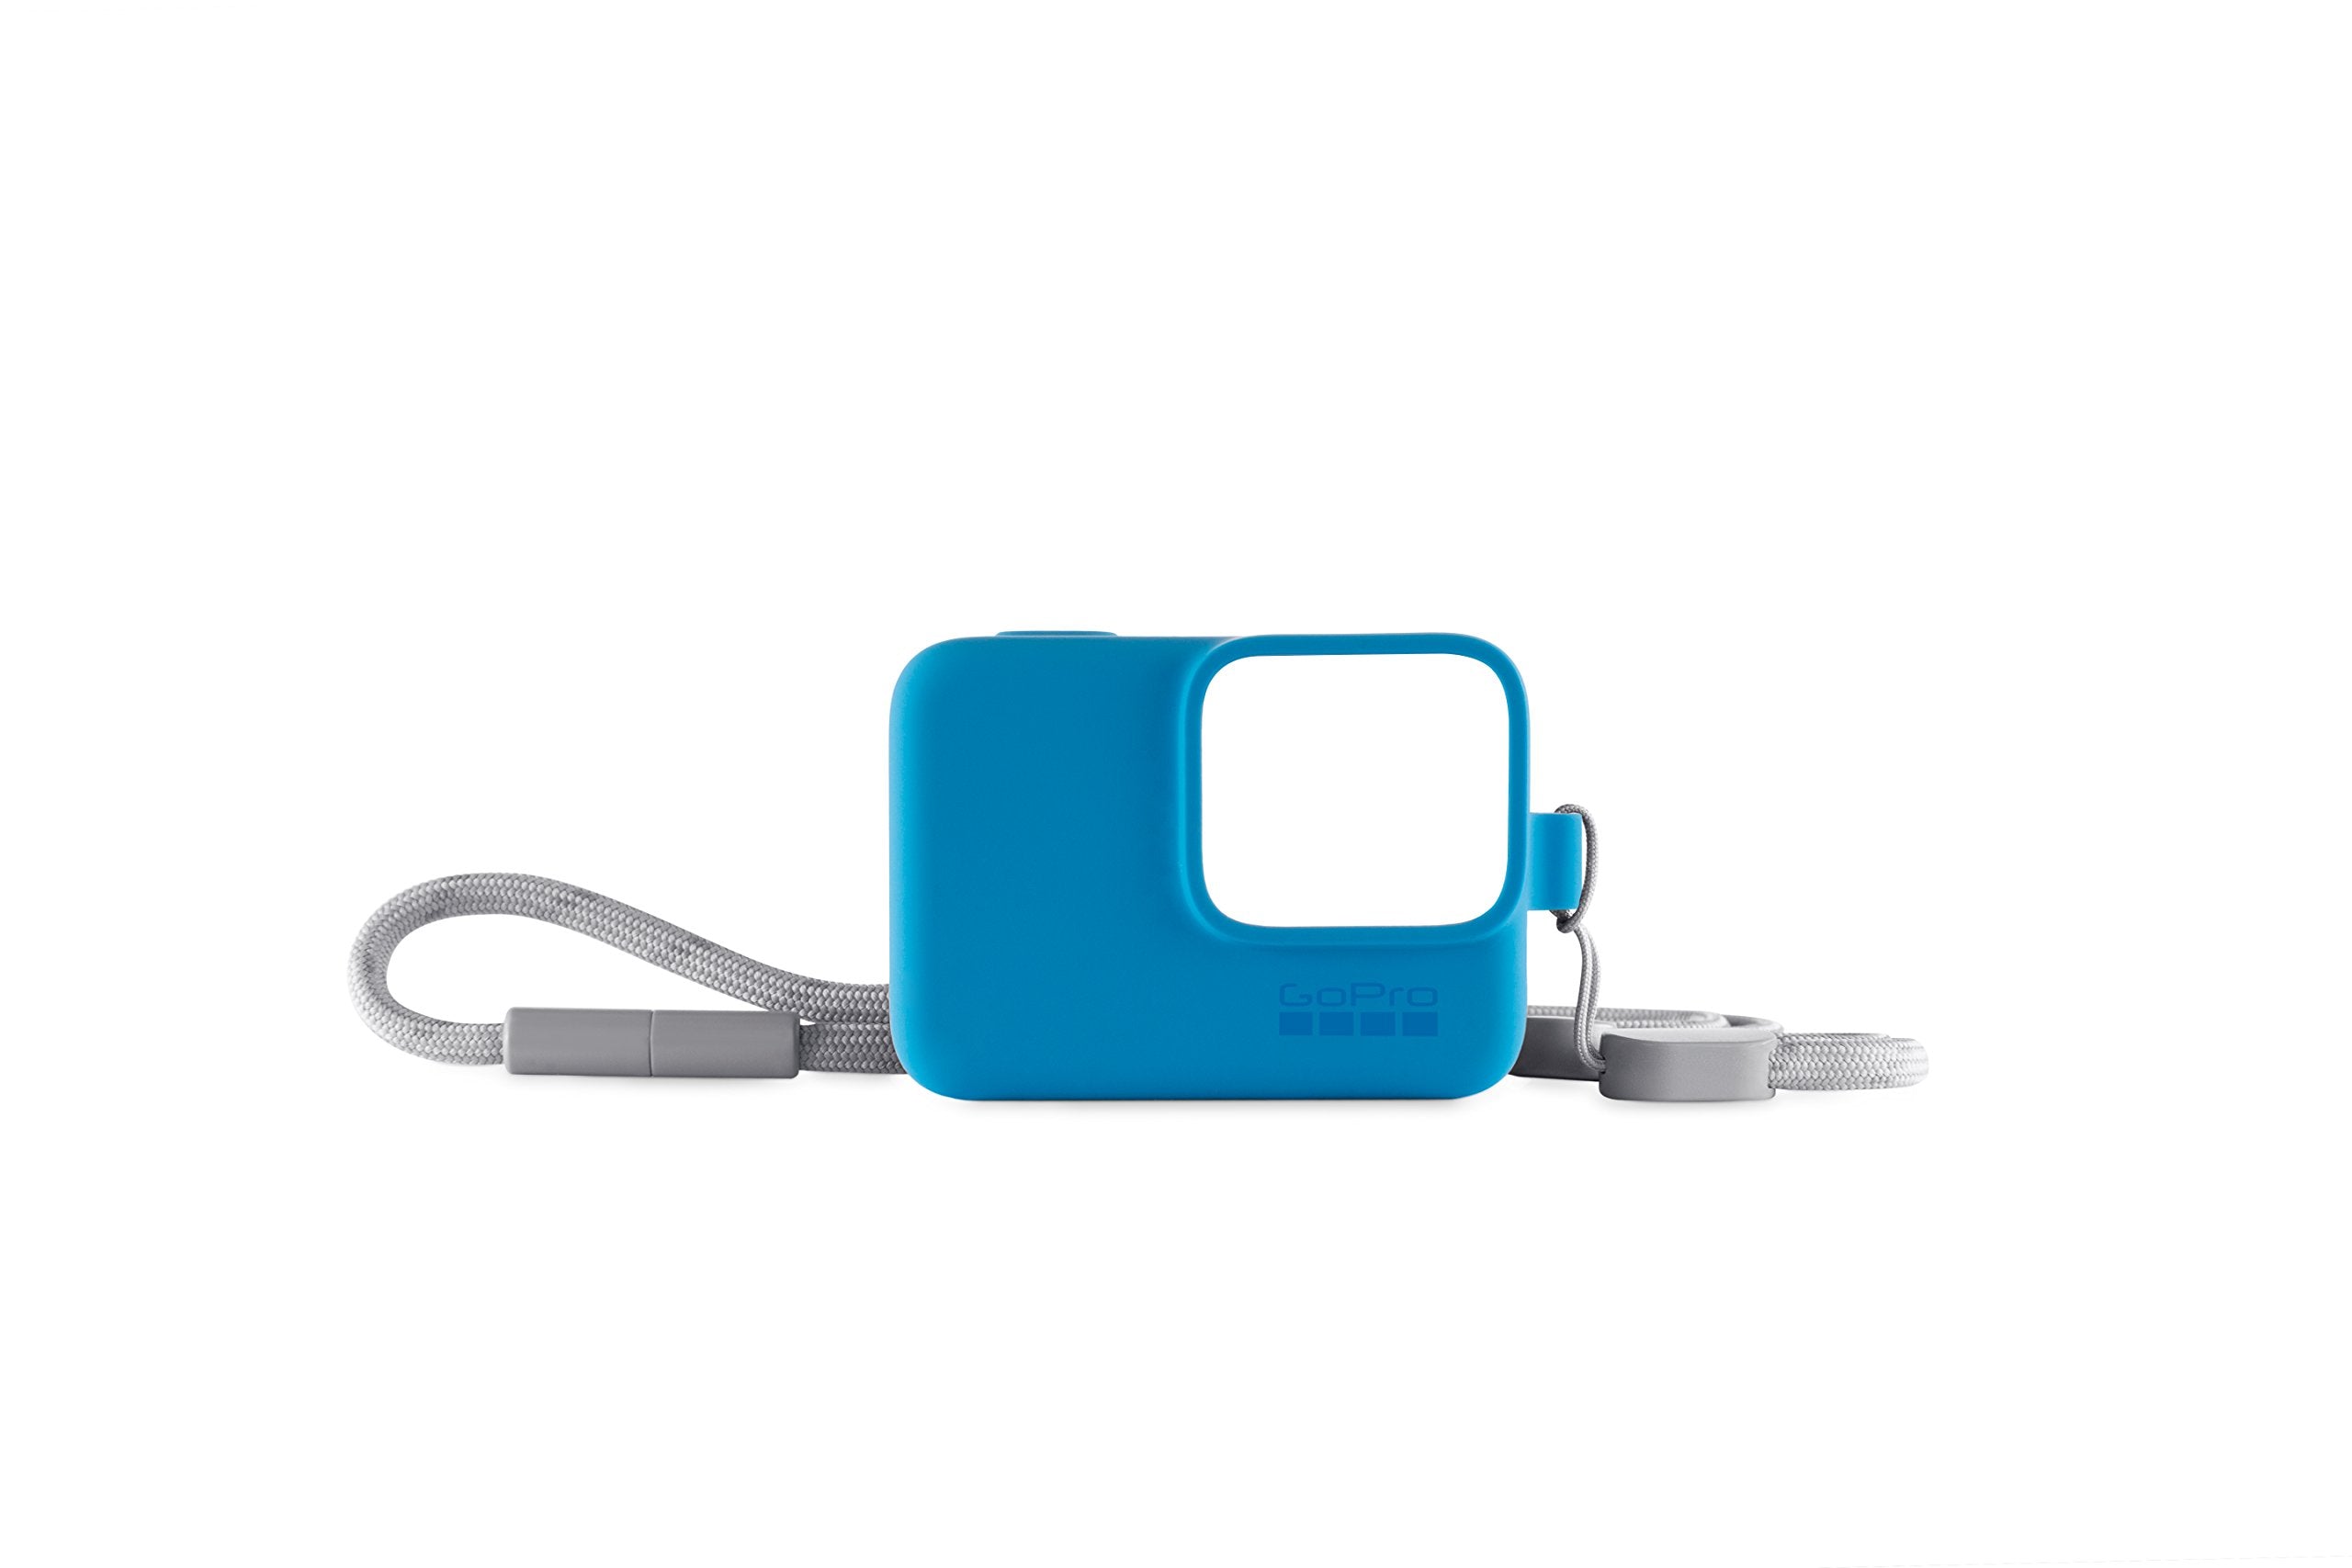 GoPro Sleeve + Lanyard in Bluebird (Gopro Official Accessory)